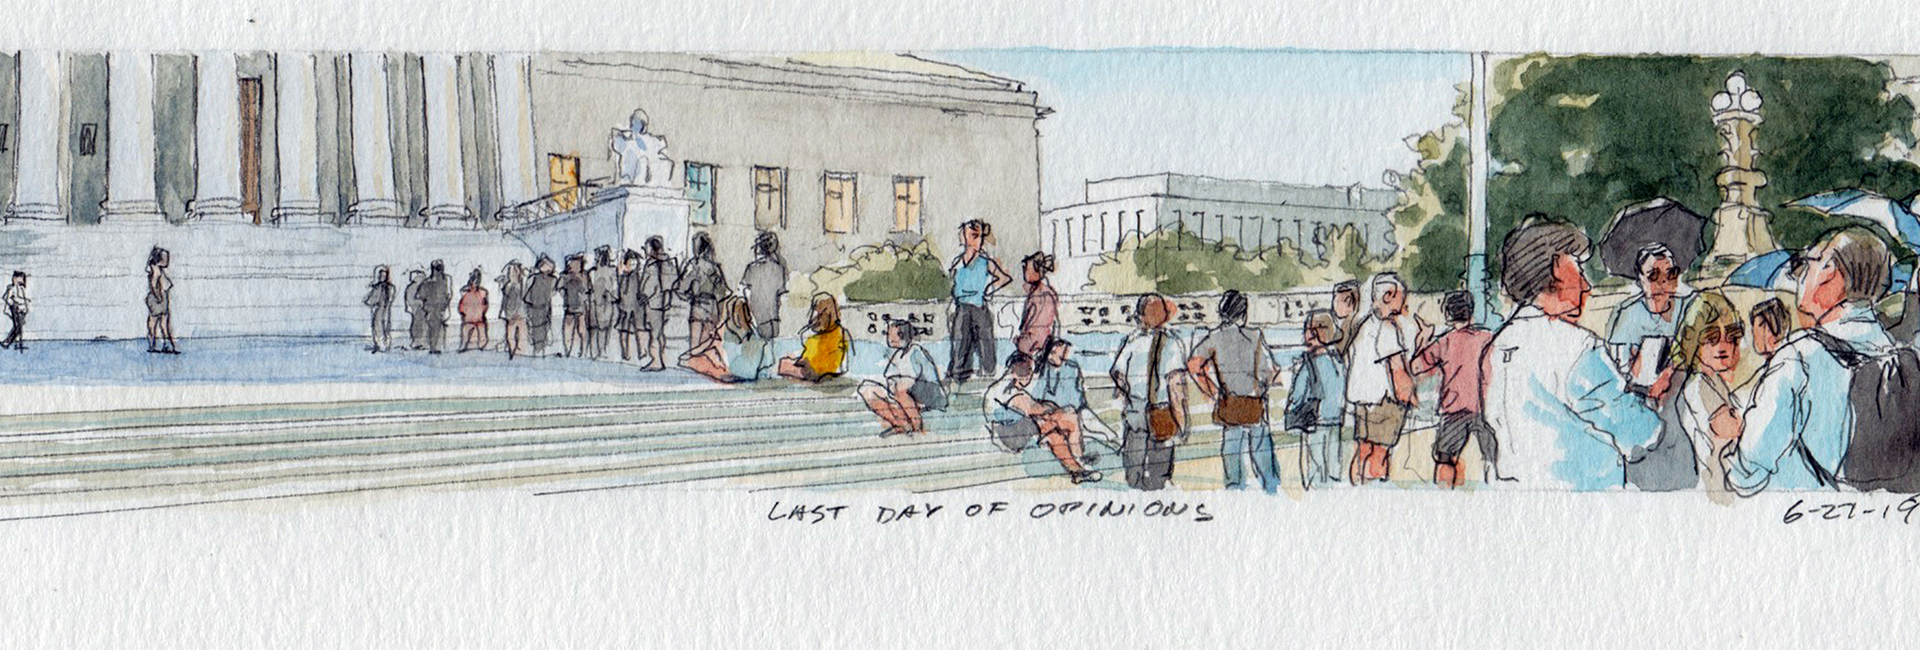 Drawing of people standing in front of the Supreme Court building